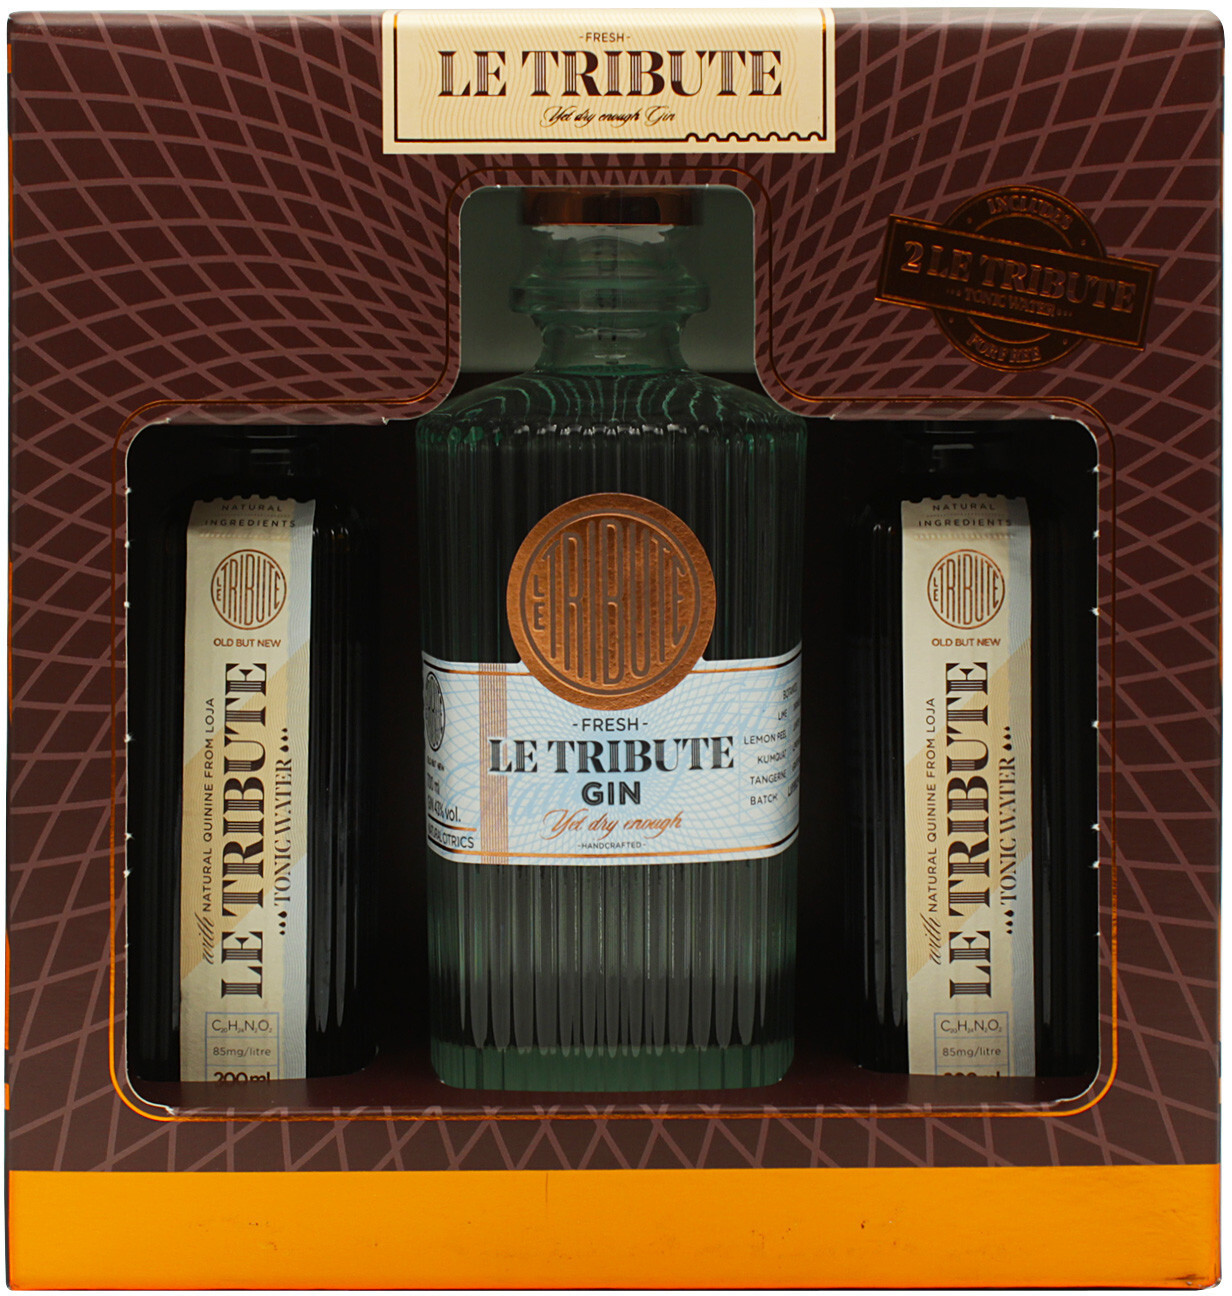 Le Tribute Dry Gin 43% ab 6,35 €